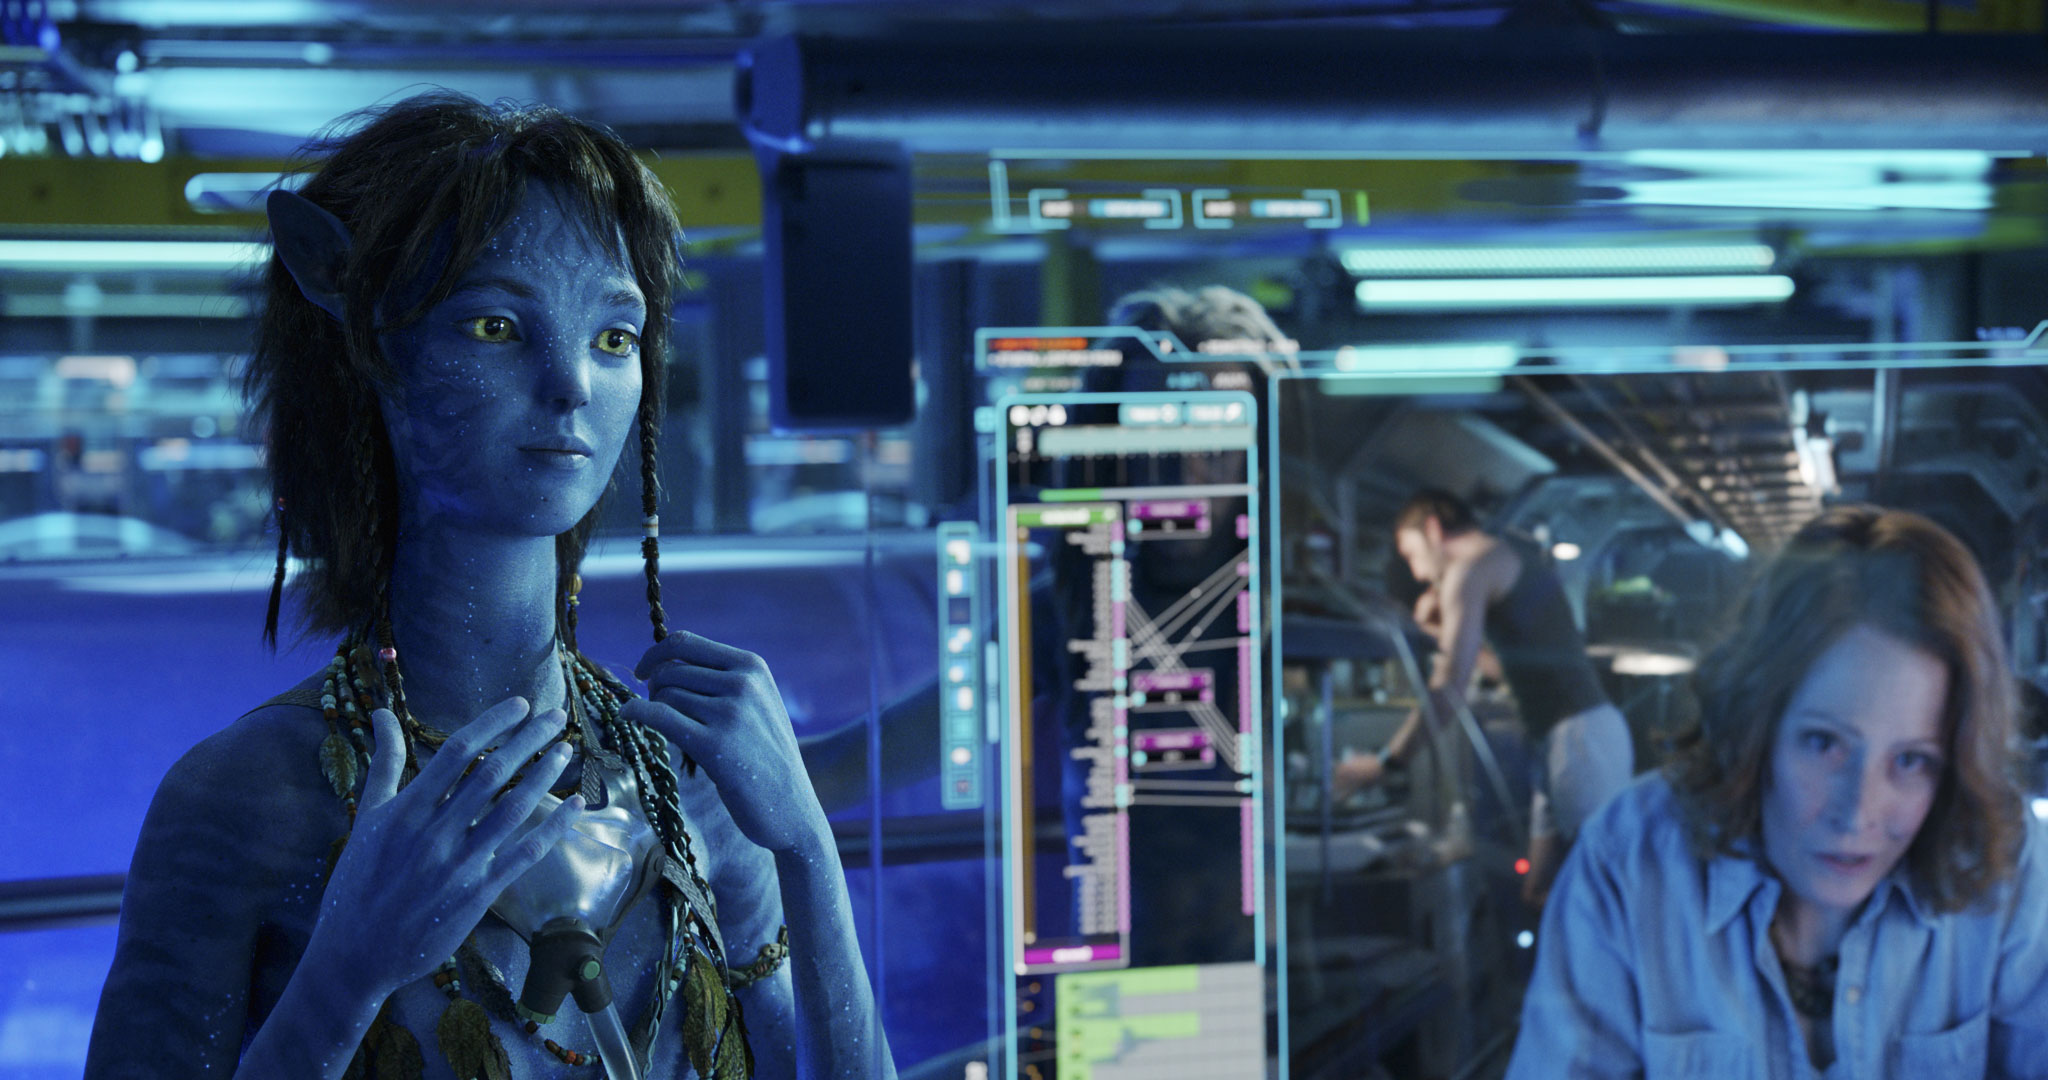 (L-R): Kiri and Sigourney Weaver as Dr. Grace Augustine in 20th Century Studios' AVATAR: THE WAY OF WATER. Photo courtesy of 20th Century Studios. © 2022 20th Century Studios. All Rights Reserved.